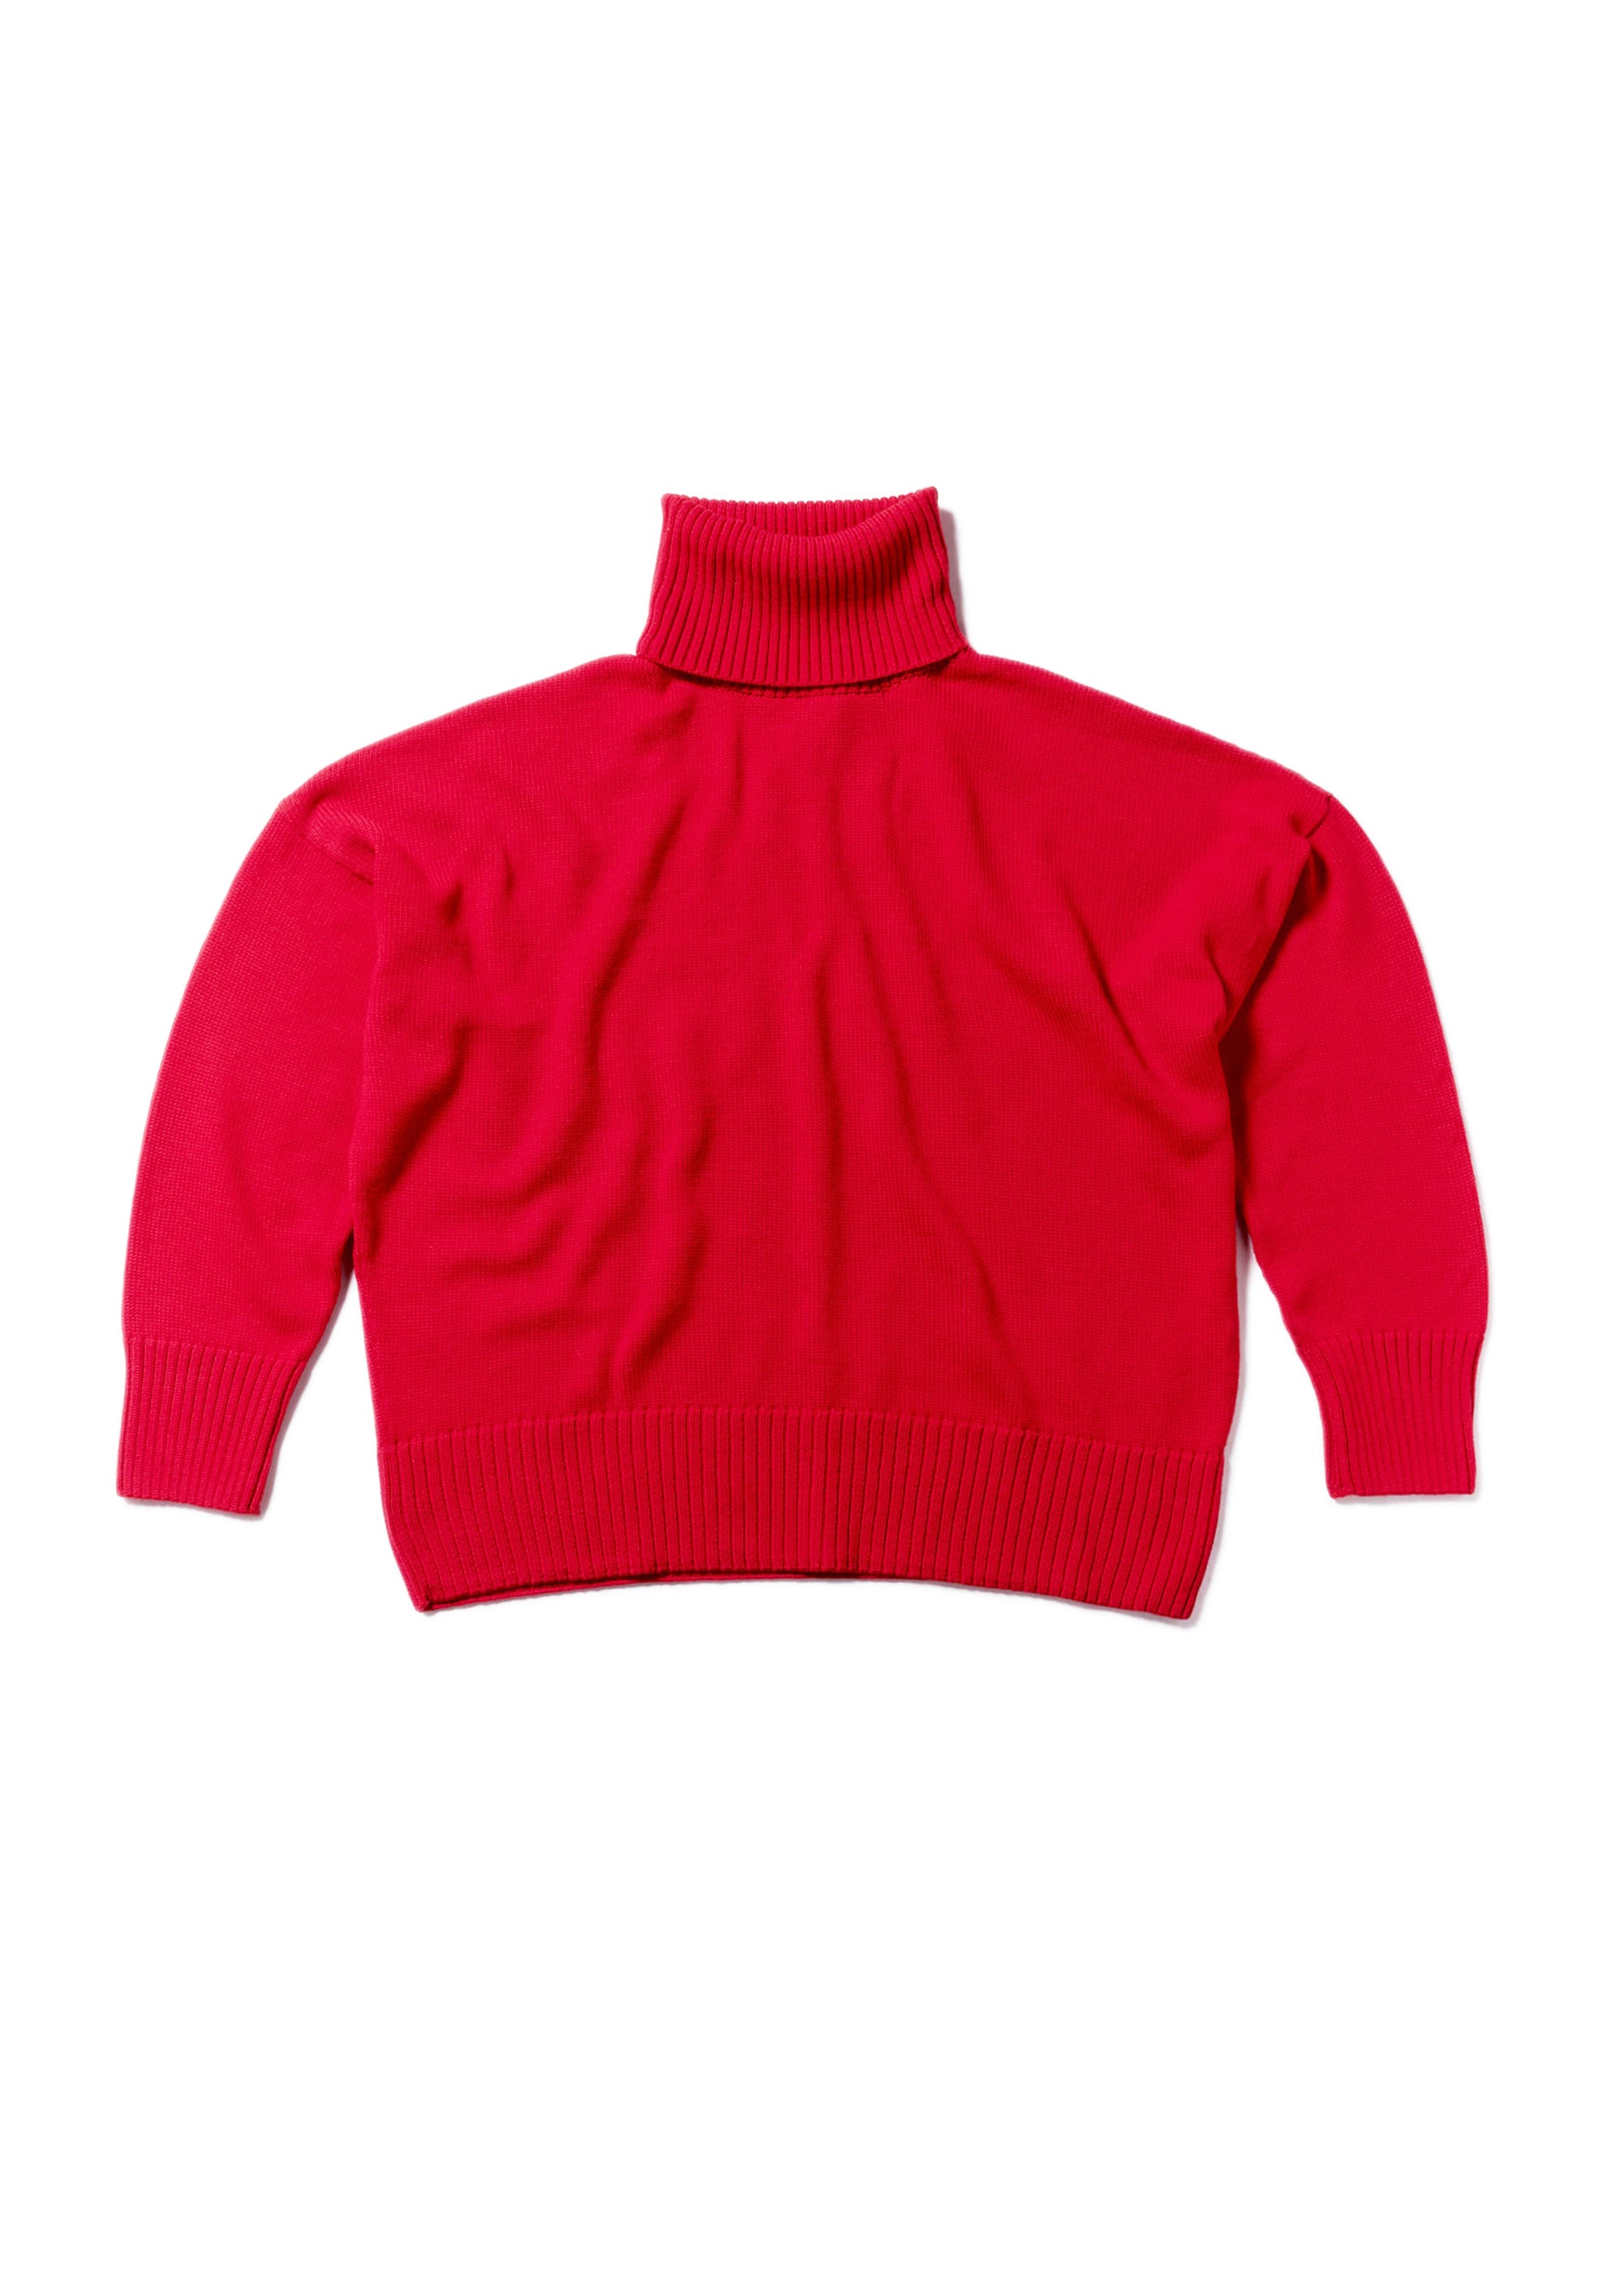 Heavy Roll Neck. Red